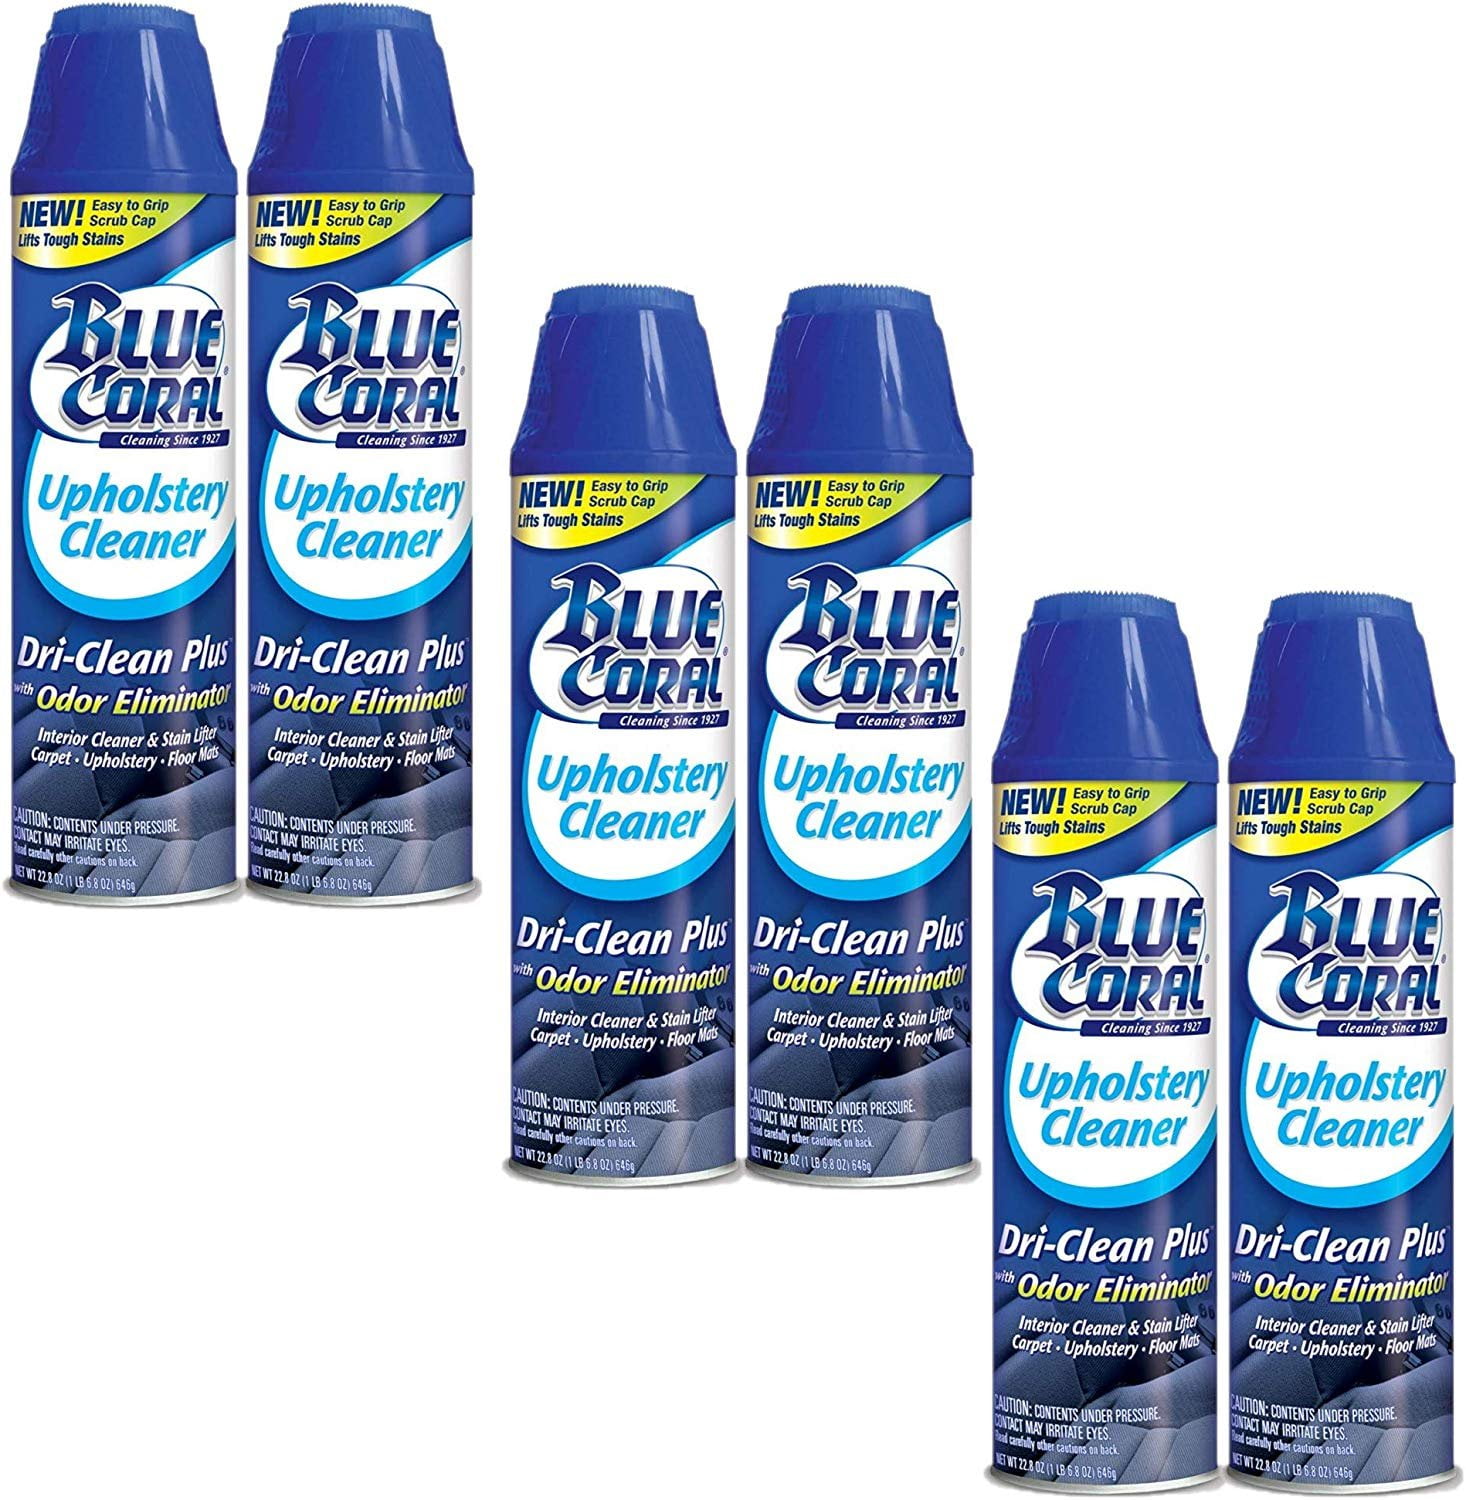 Blue Coral DC22 Upholstery Cleaner Dri-Clean Plus with Odor Eliminator,  22.8 oz. Aerosol (6 Pack) (6) 